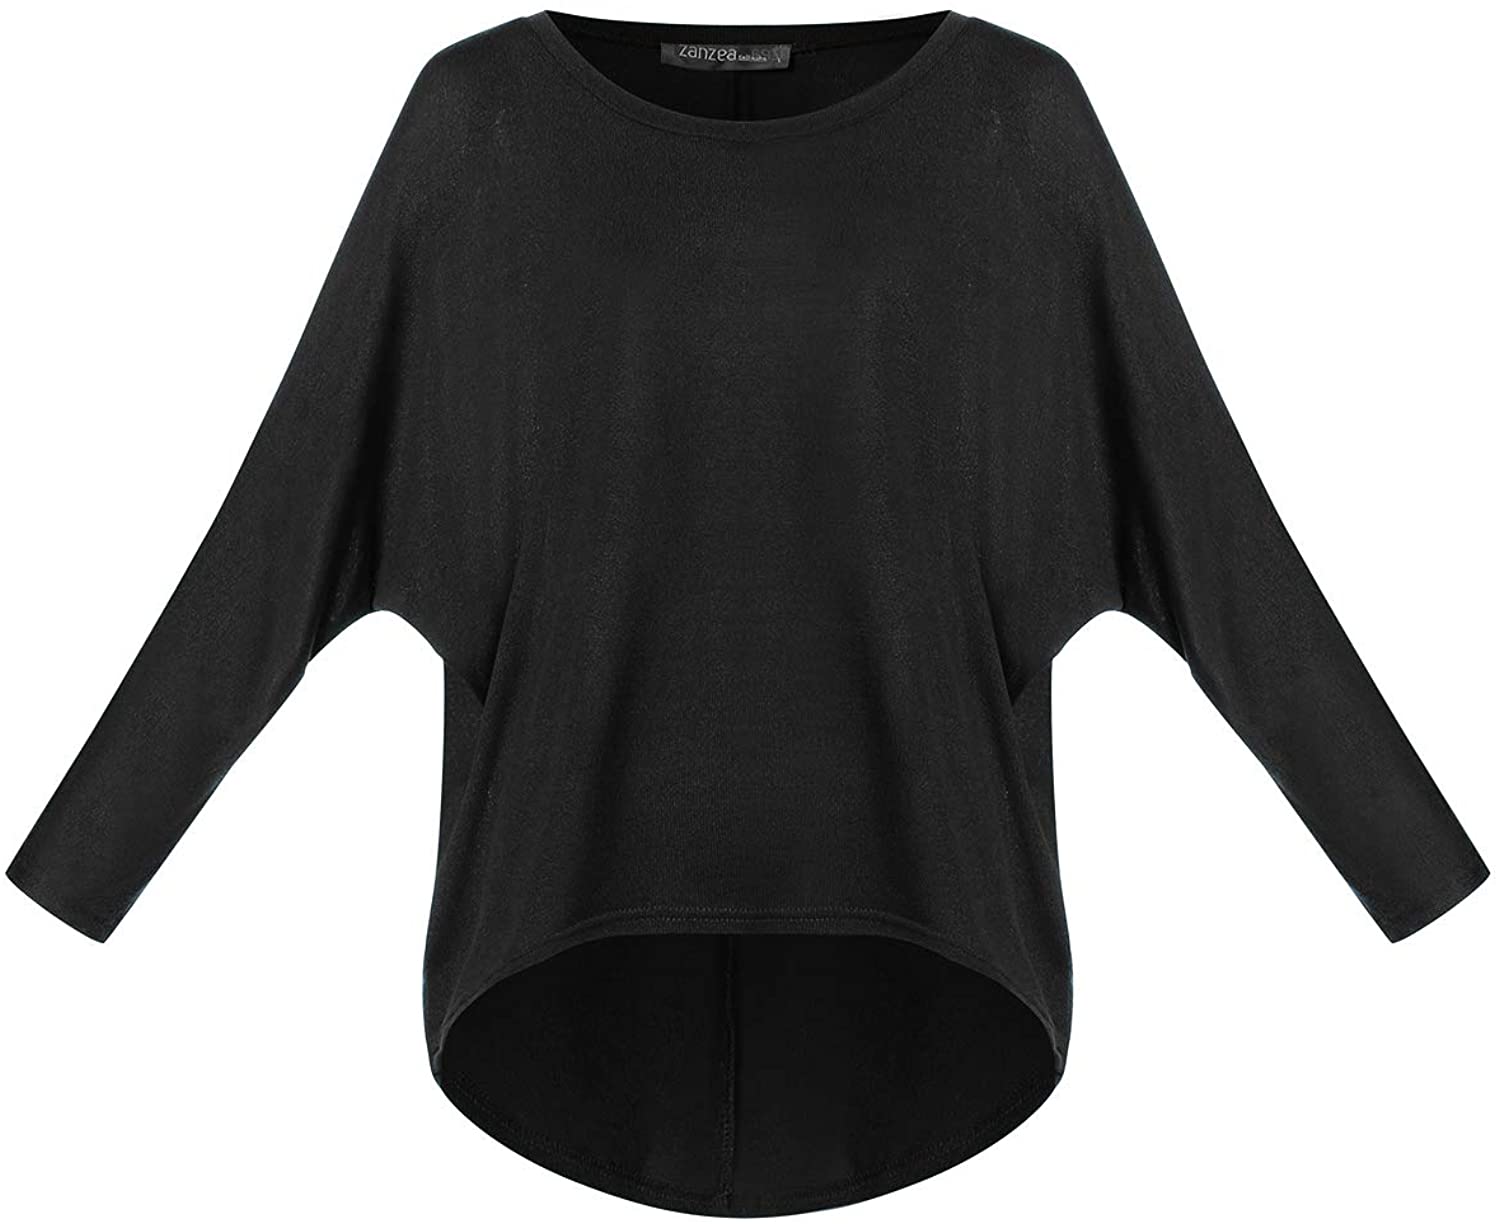 ZANZEA Womens Batwing Sleeve Off Shoulder Loose Oversized Baggy Tops Sweater Pullover Casual Blouse T-Shirt